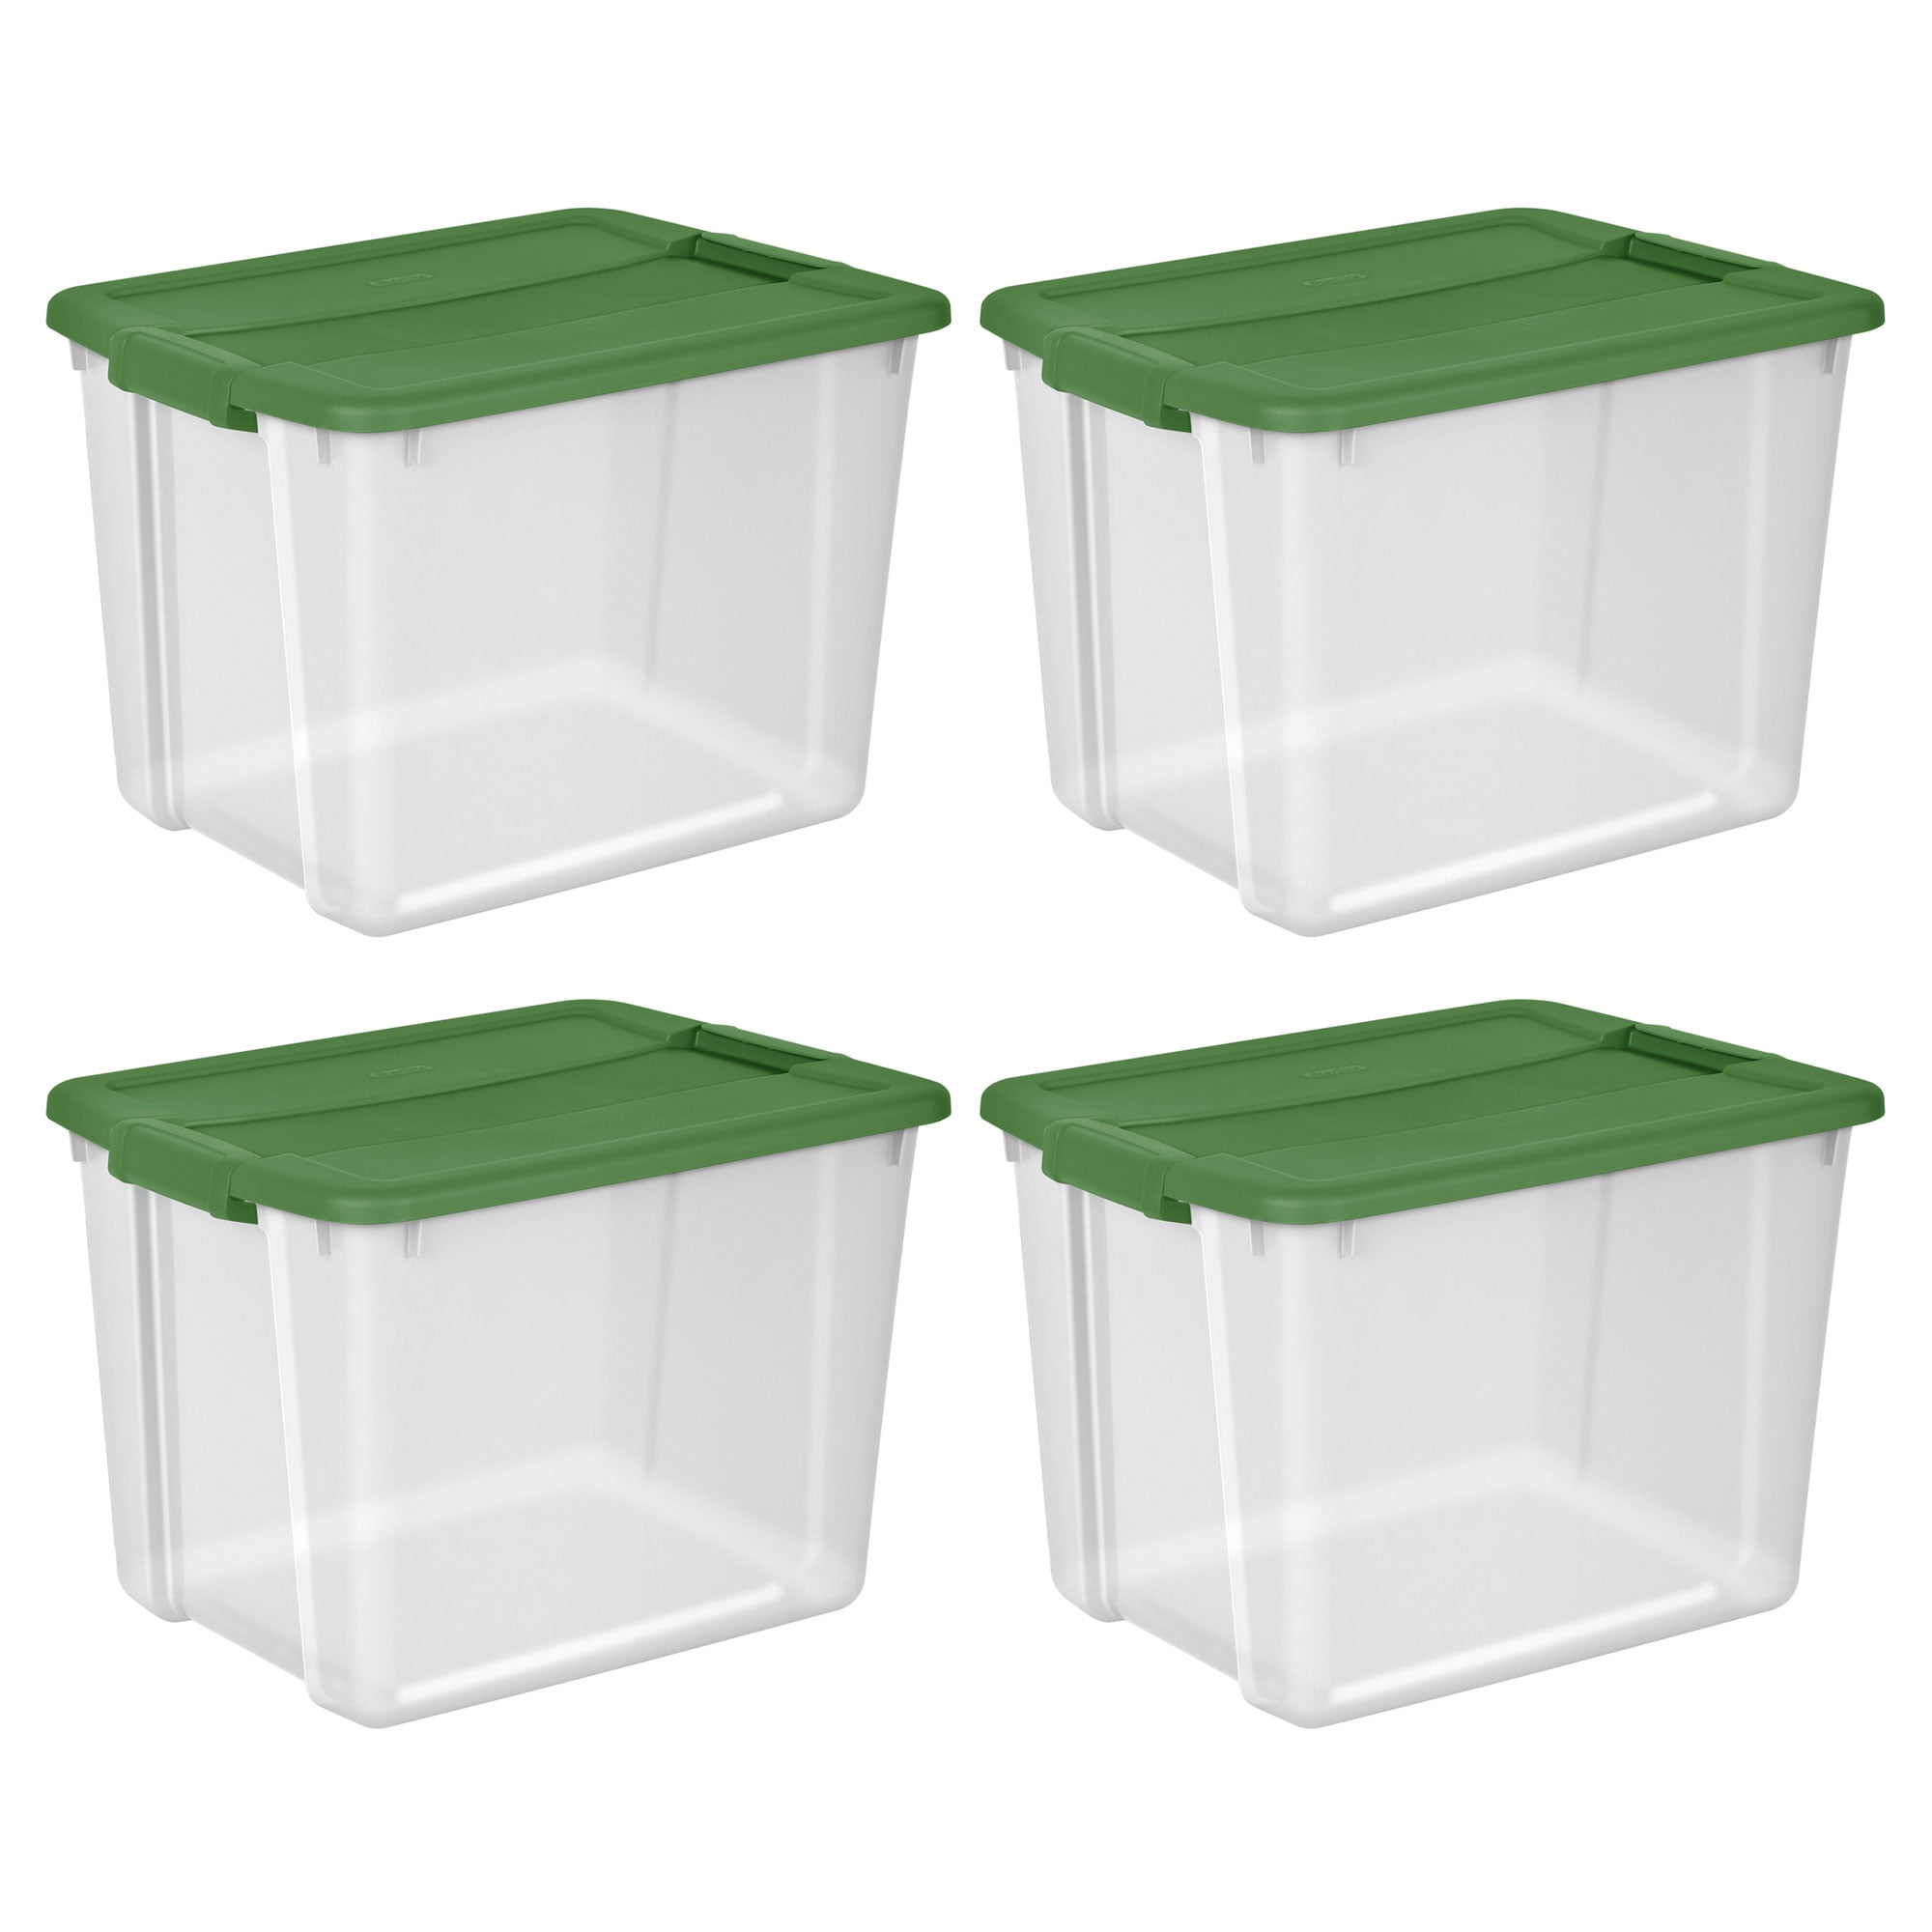 Stack And Pull Latching Flat Lid Storage Box, 6.73 Gal, 16.5 X 22 X 6.5,  Clear/translucent Blue | Bundle of 10 Each